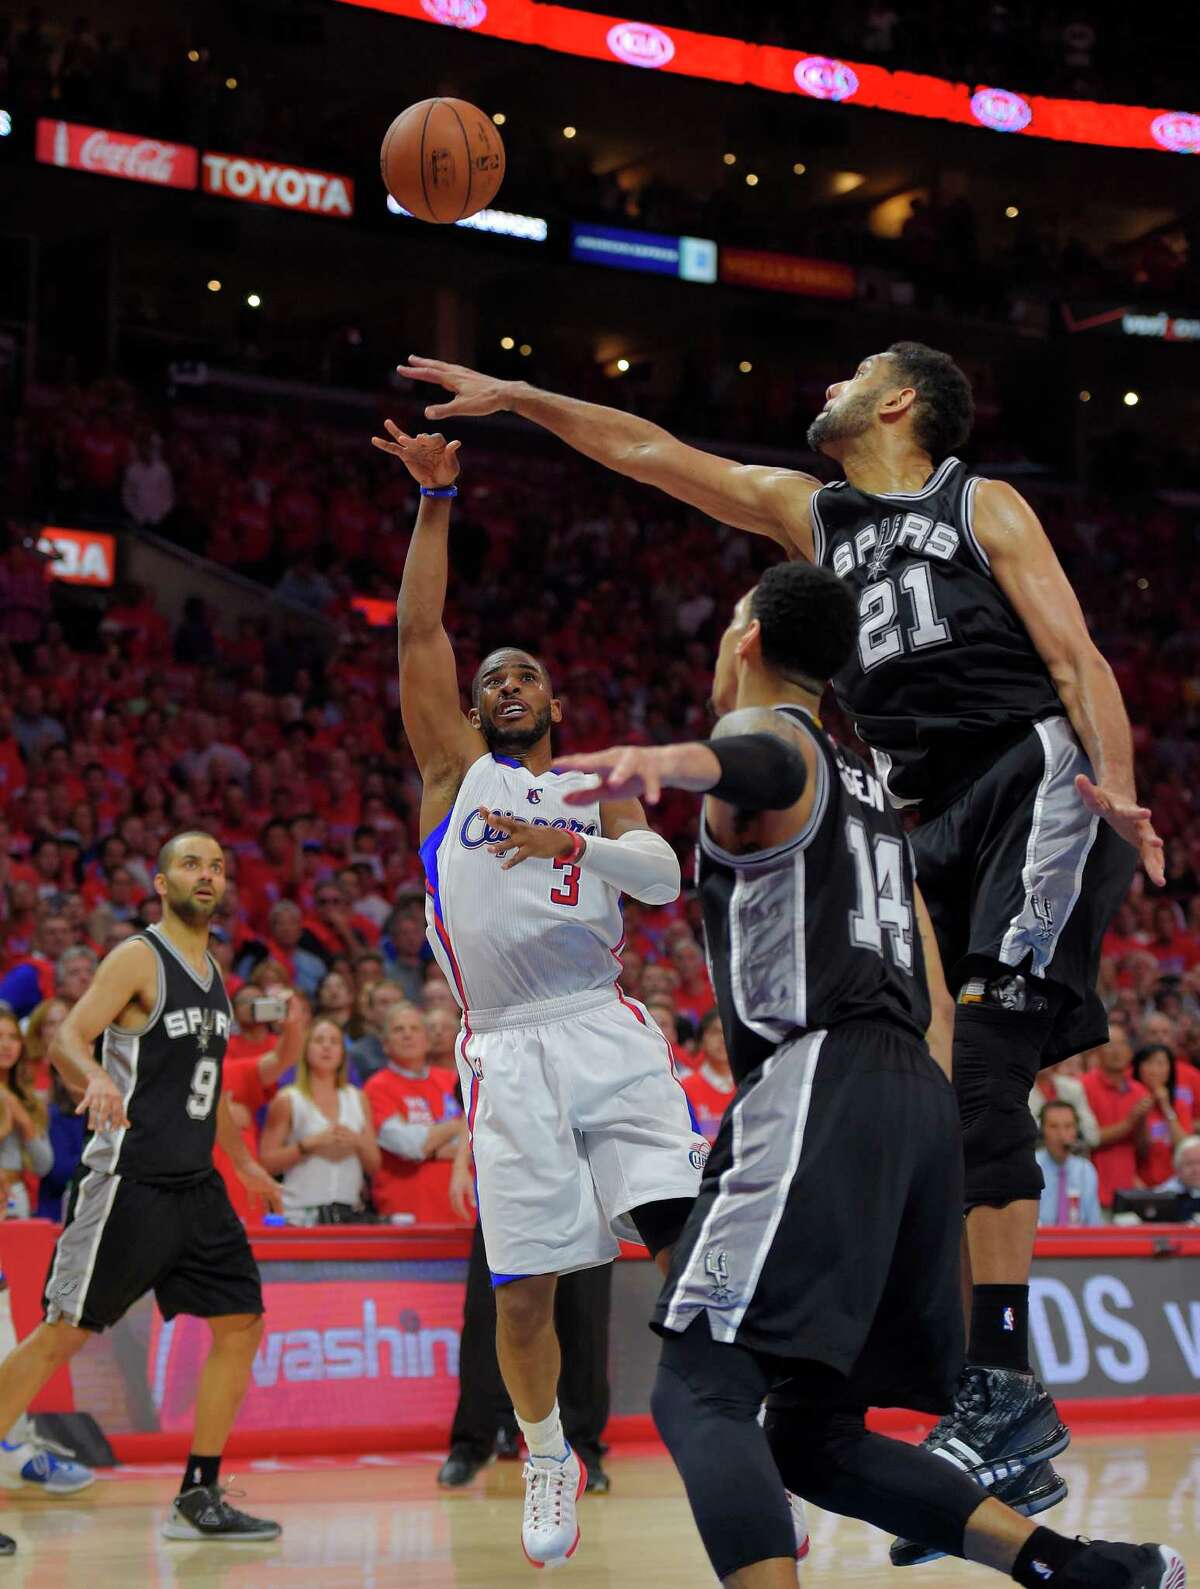 Clippers guard Chris Paul shoots over Spurs forward Tim Duncan (21) during the final seconds of Game 7 in a Western Conference first-round playoff series on May 2, 2015, in Los Angeles.